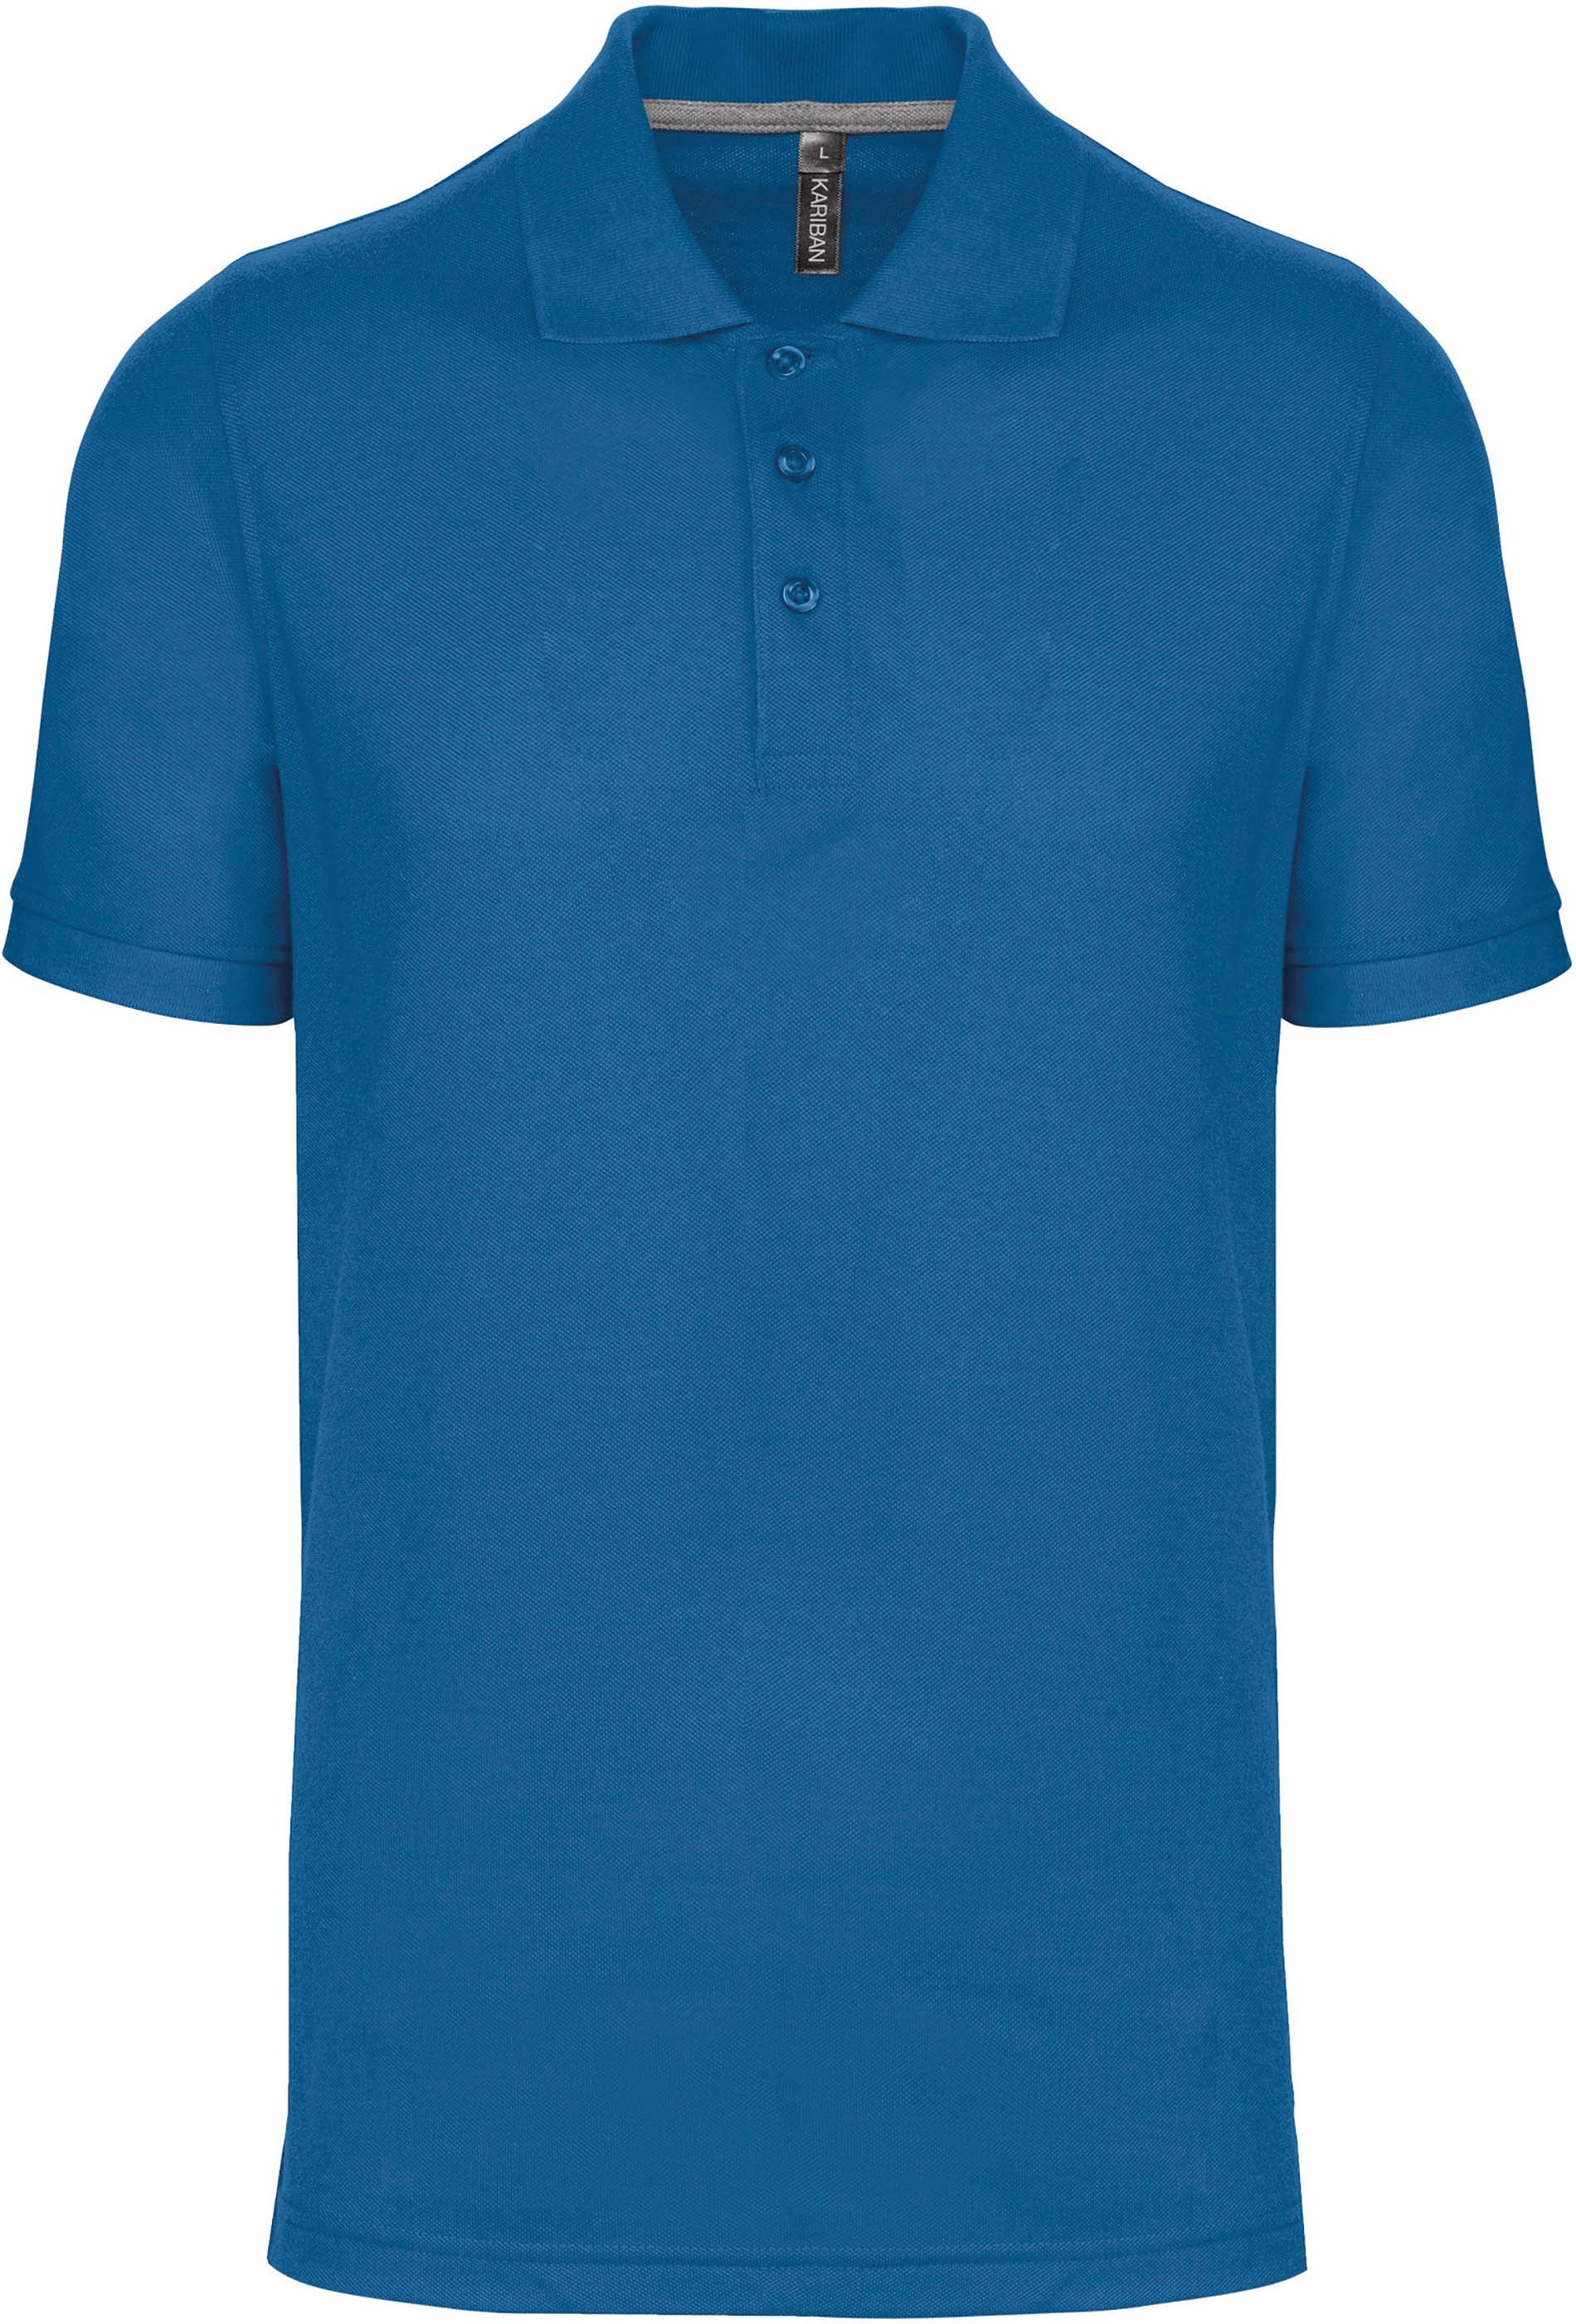 Polo silver plus WK-274 polo homme : minimum 5 pièces WK- Designed to work Royal S 